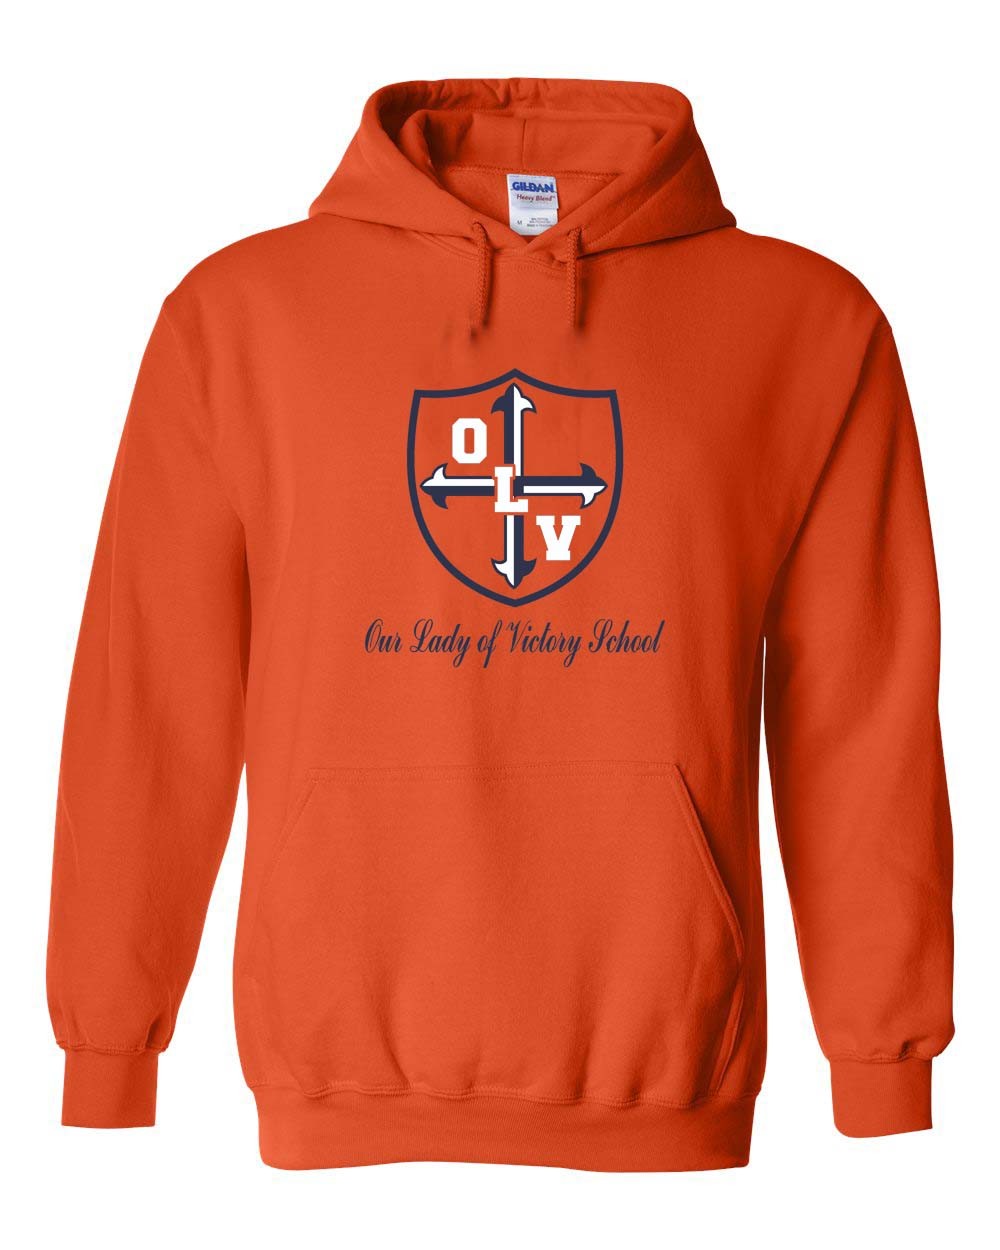 OLV Spirit Pullover Hoodie w/ Navy Logo - Please Allow 2-3 Weeks for Delivery